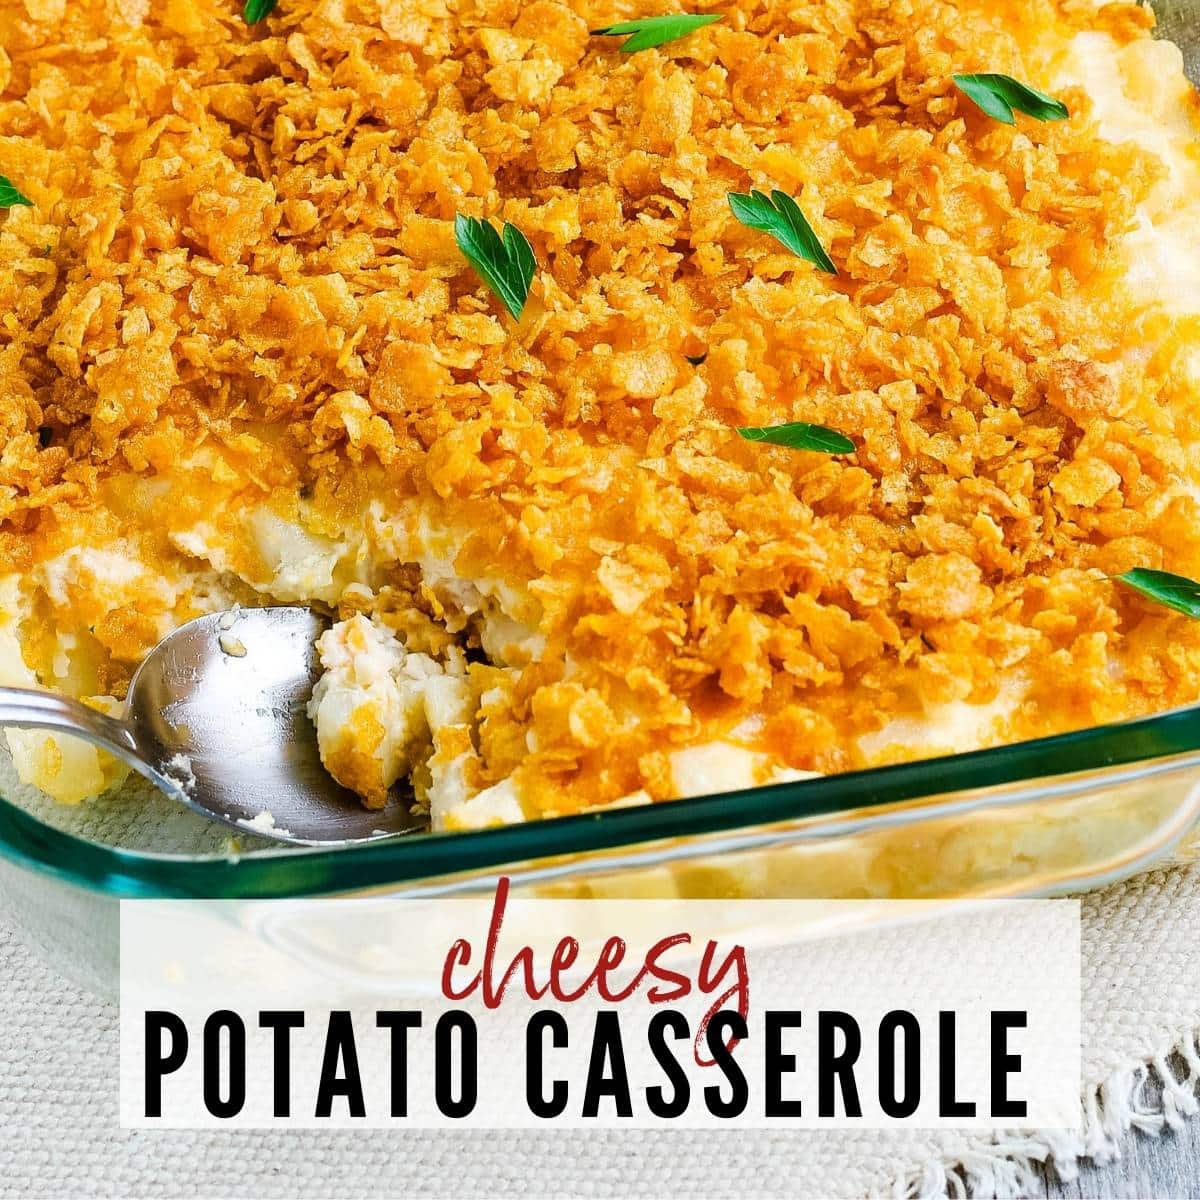 Cheesy hashbrown casserole in a glass baking dish with graphic overlay